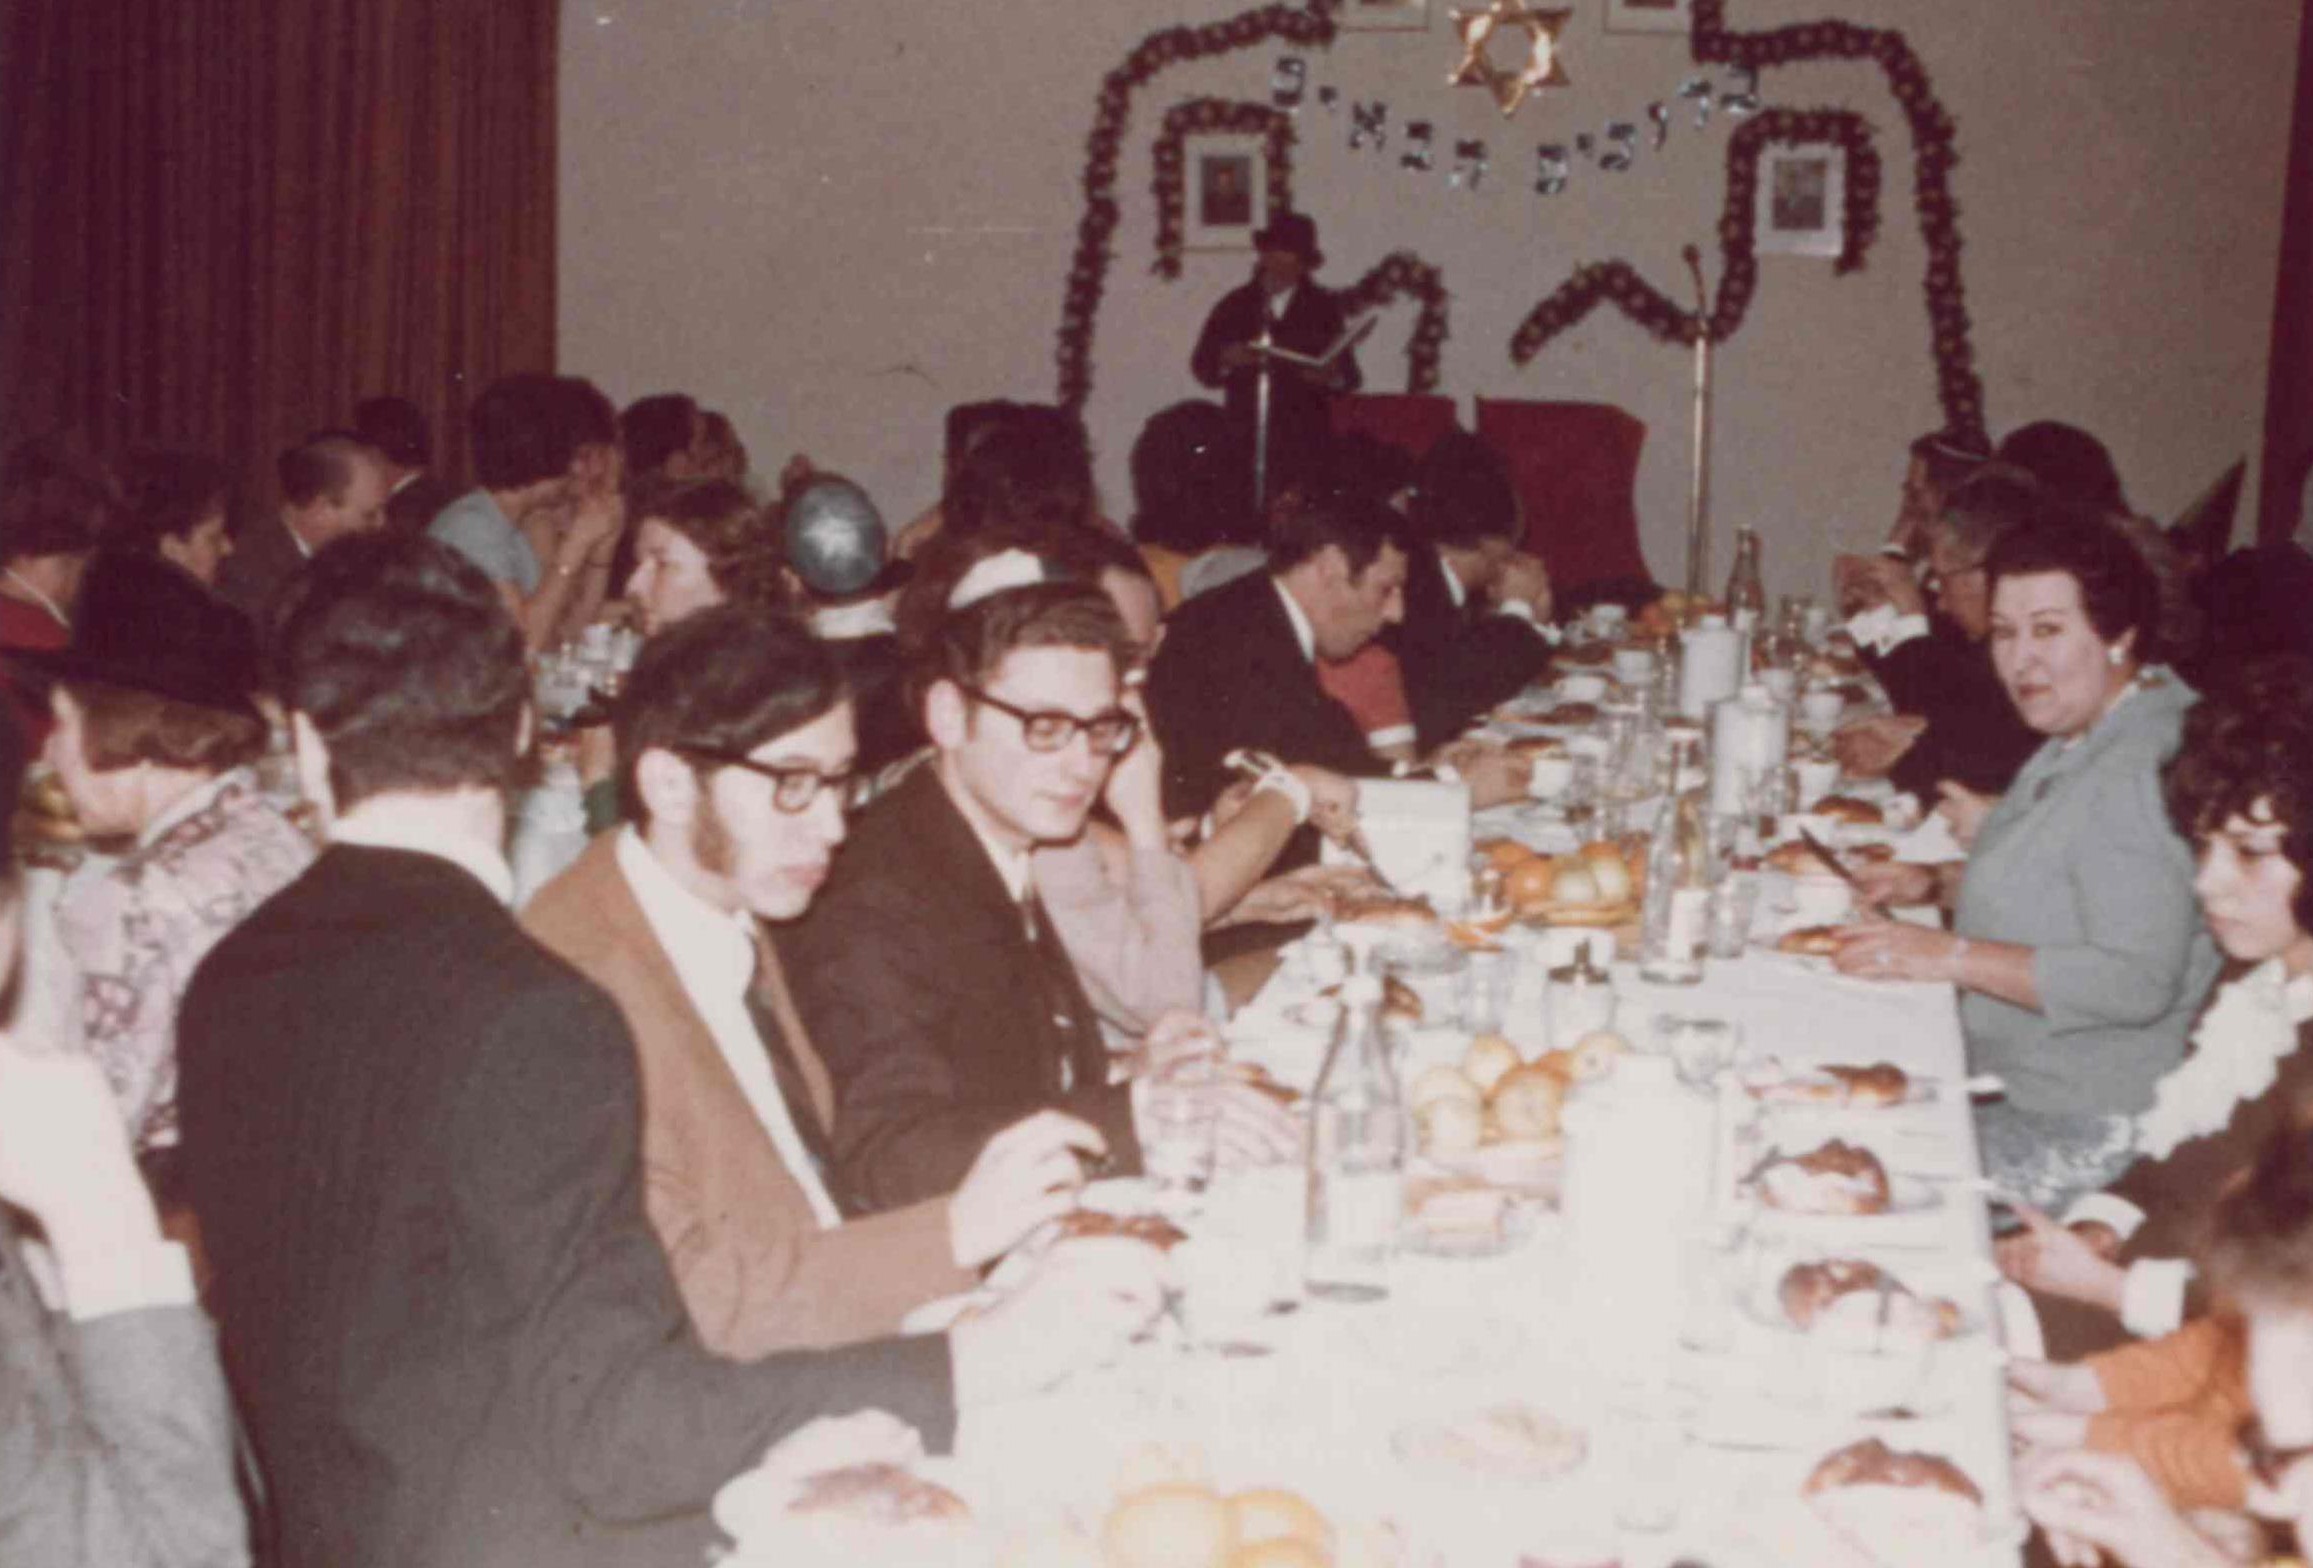 Community event in the 1970s. Collection Jewish Community Wiesbaden